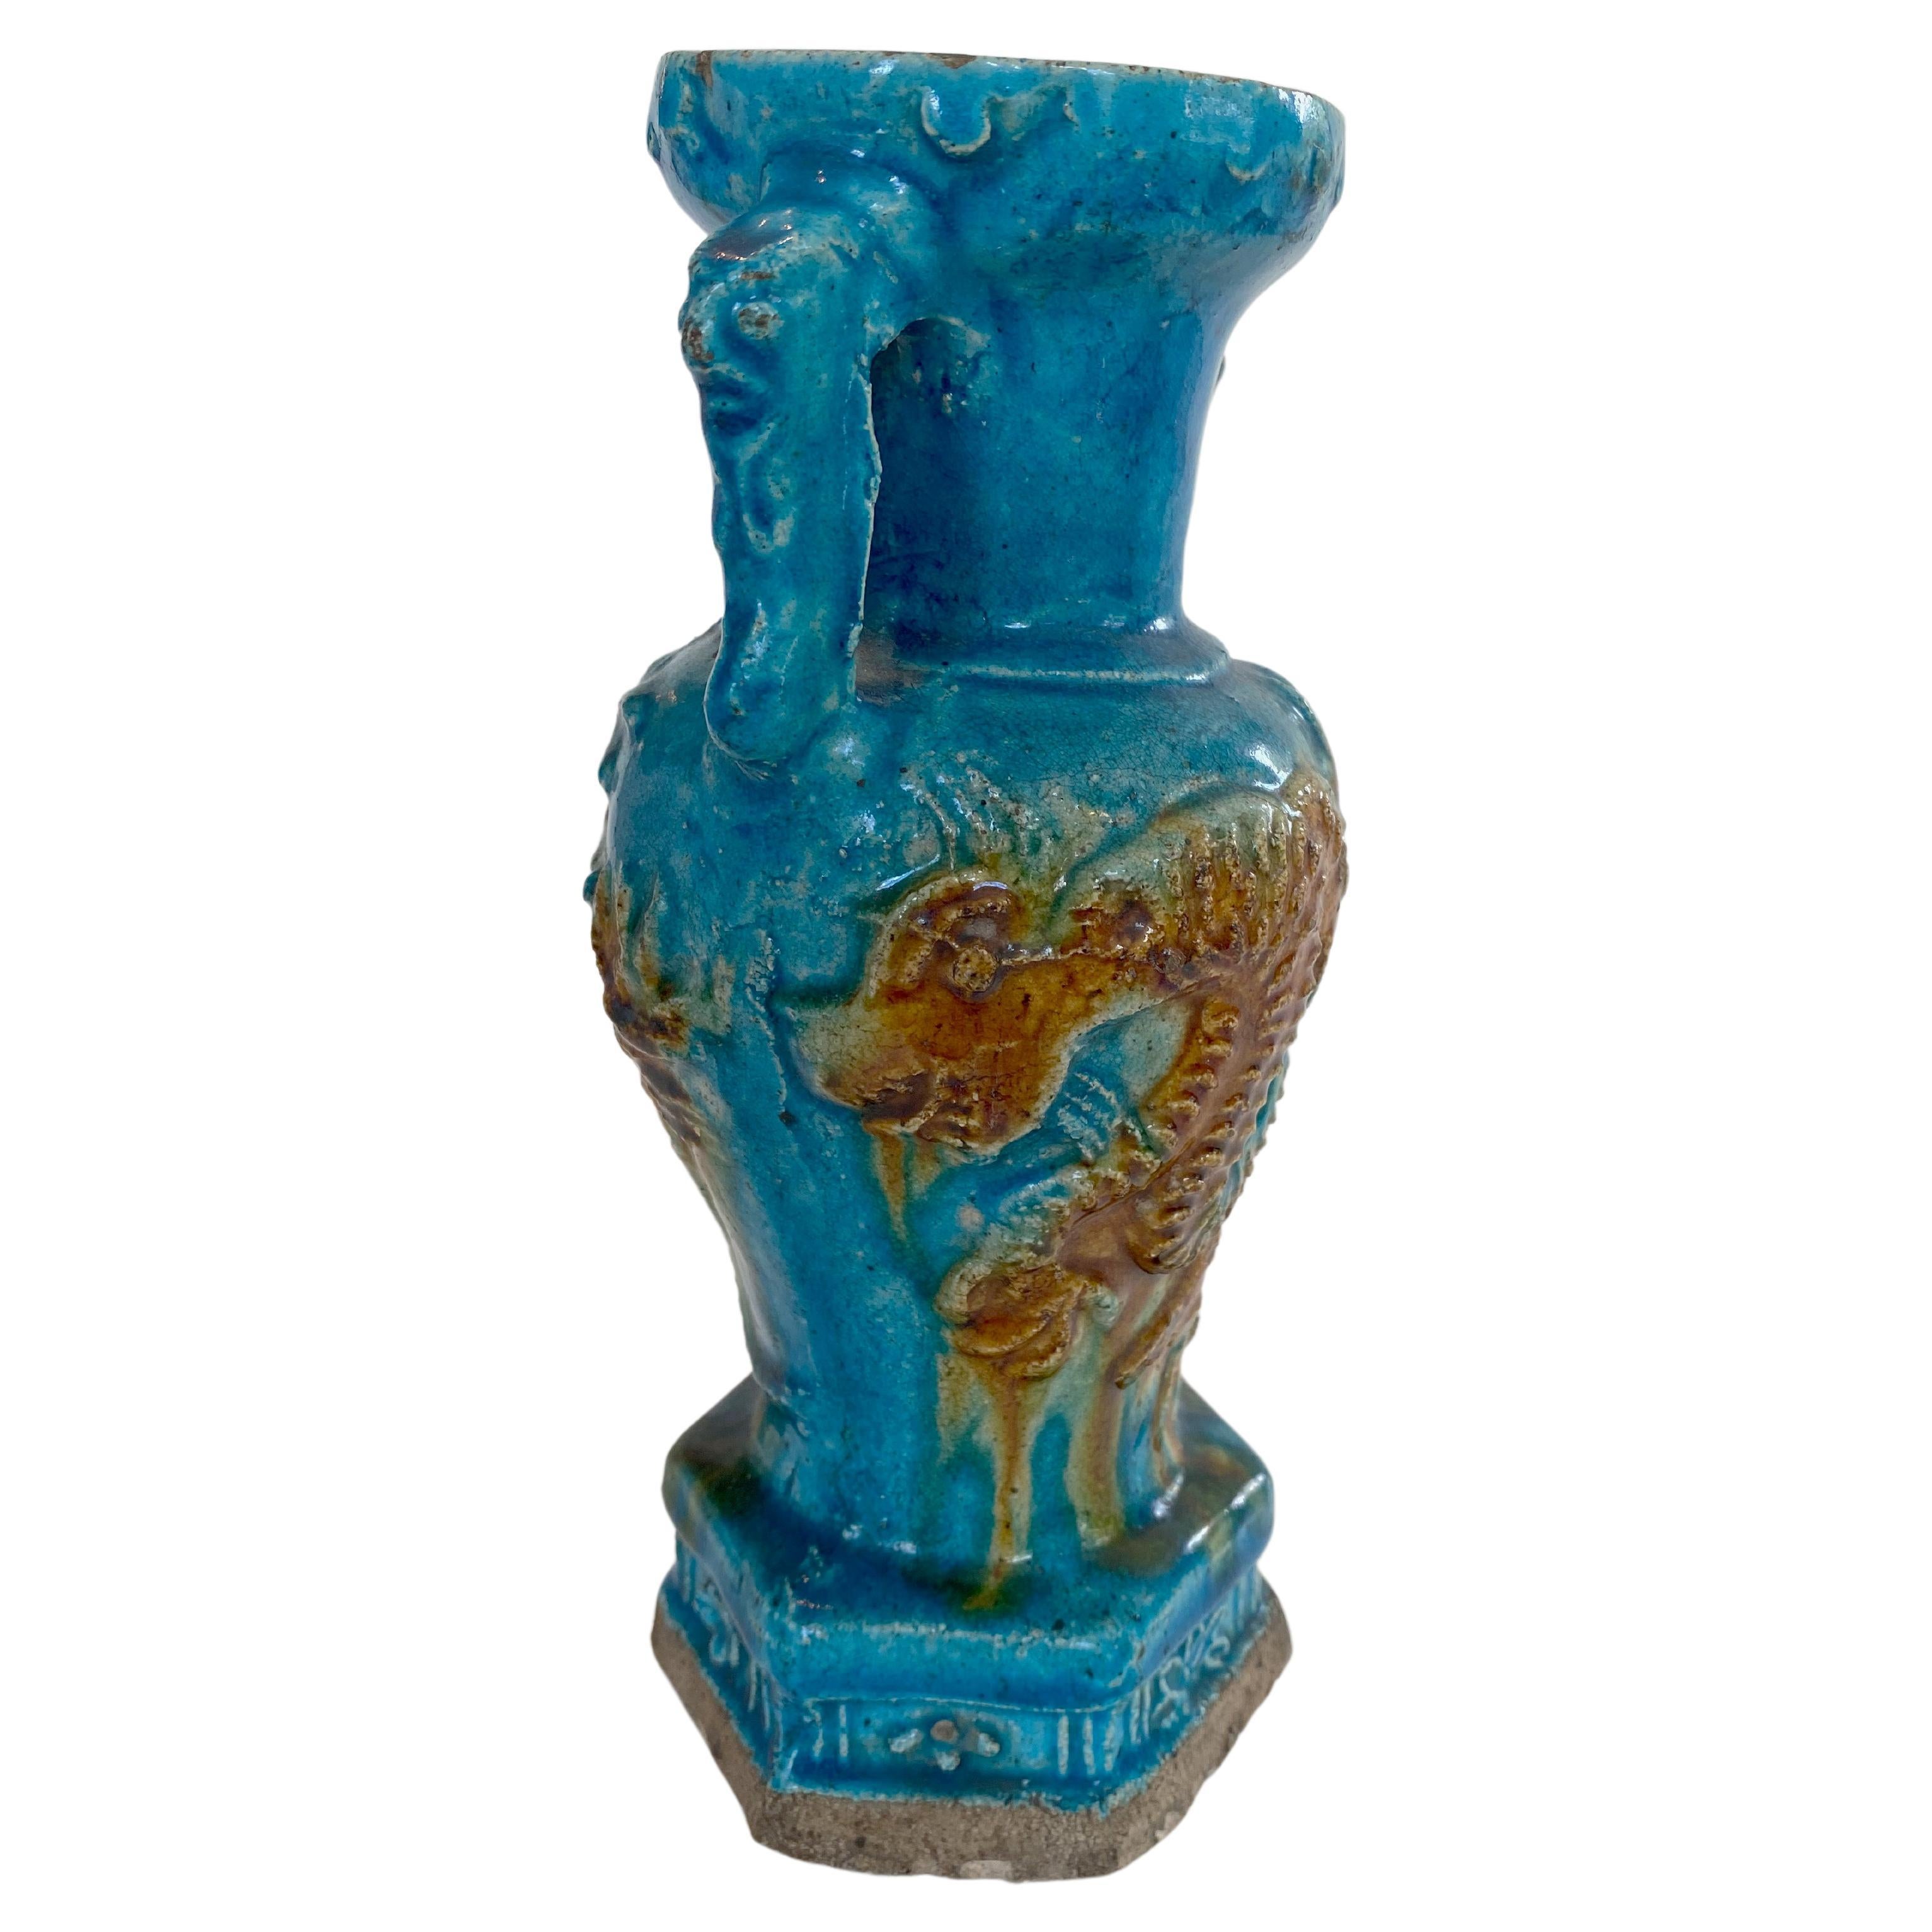 Ming Dynasty (16th century) pottery vase with vivid turquoise glaze, decorated with dragons. The vase is partially moulded, with circular bosses around the mouth rim and a hexagonal base decorated with relief flowers. The vase has two handles that